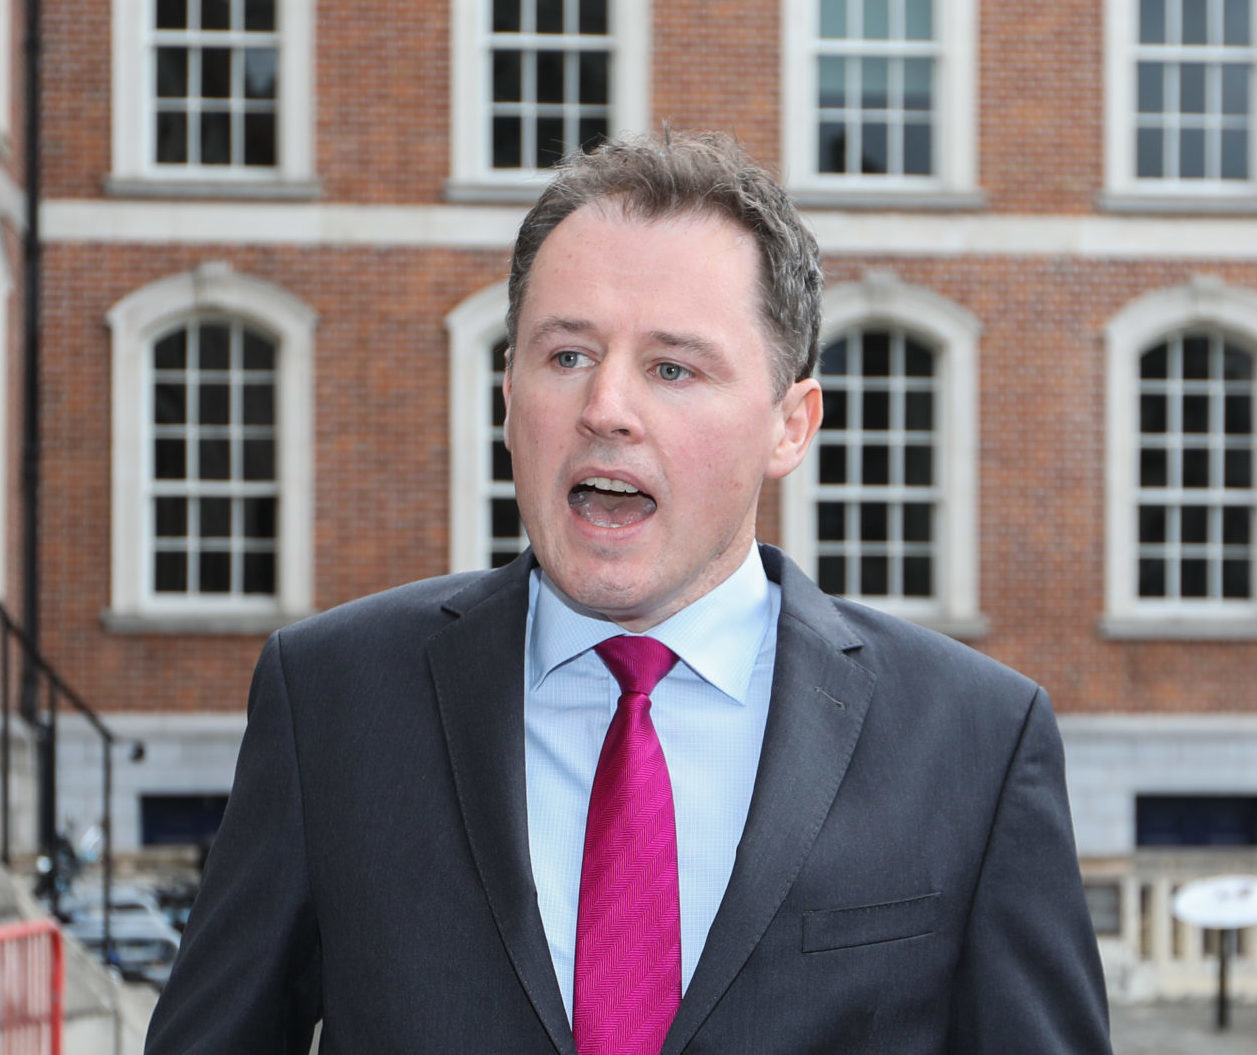 Minister for Agriculture Charlie McConalogue speaking to the media as he arrived at Dublin Castle for a Cabinet meeting in May 2022.